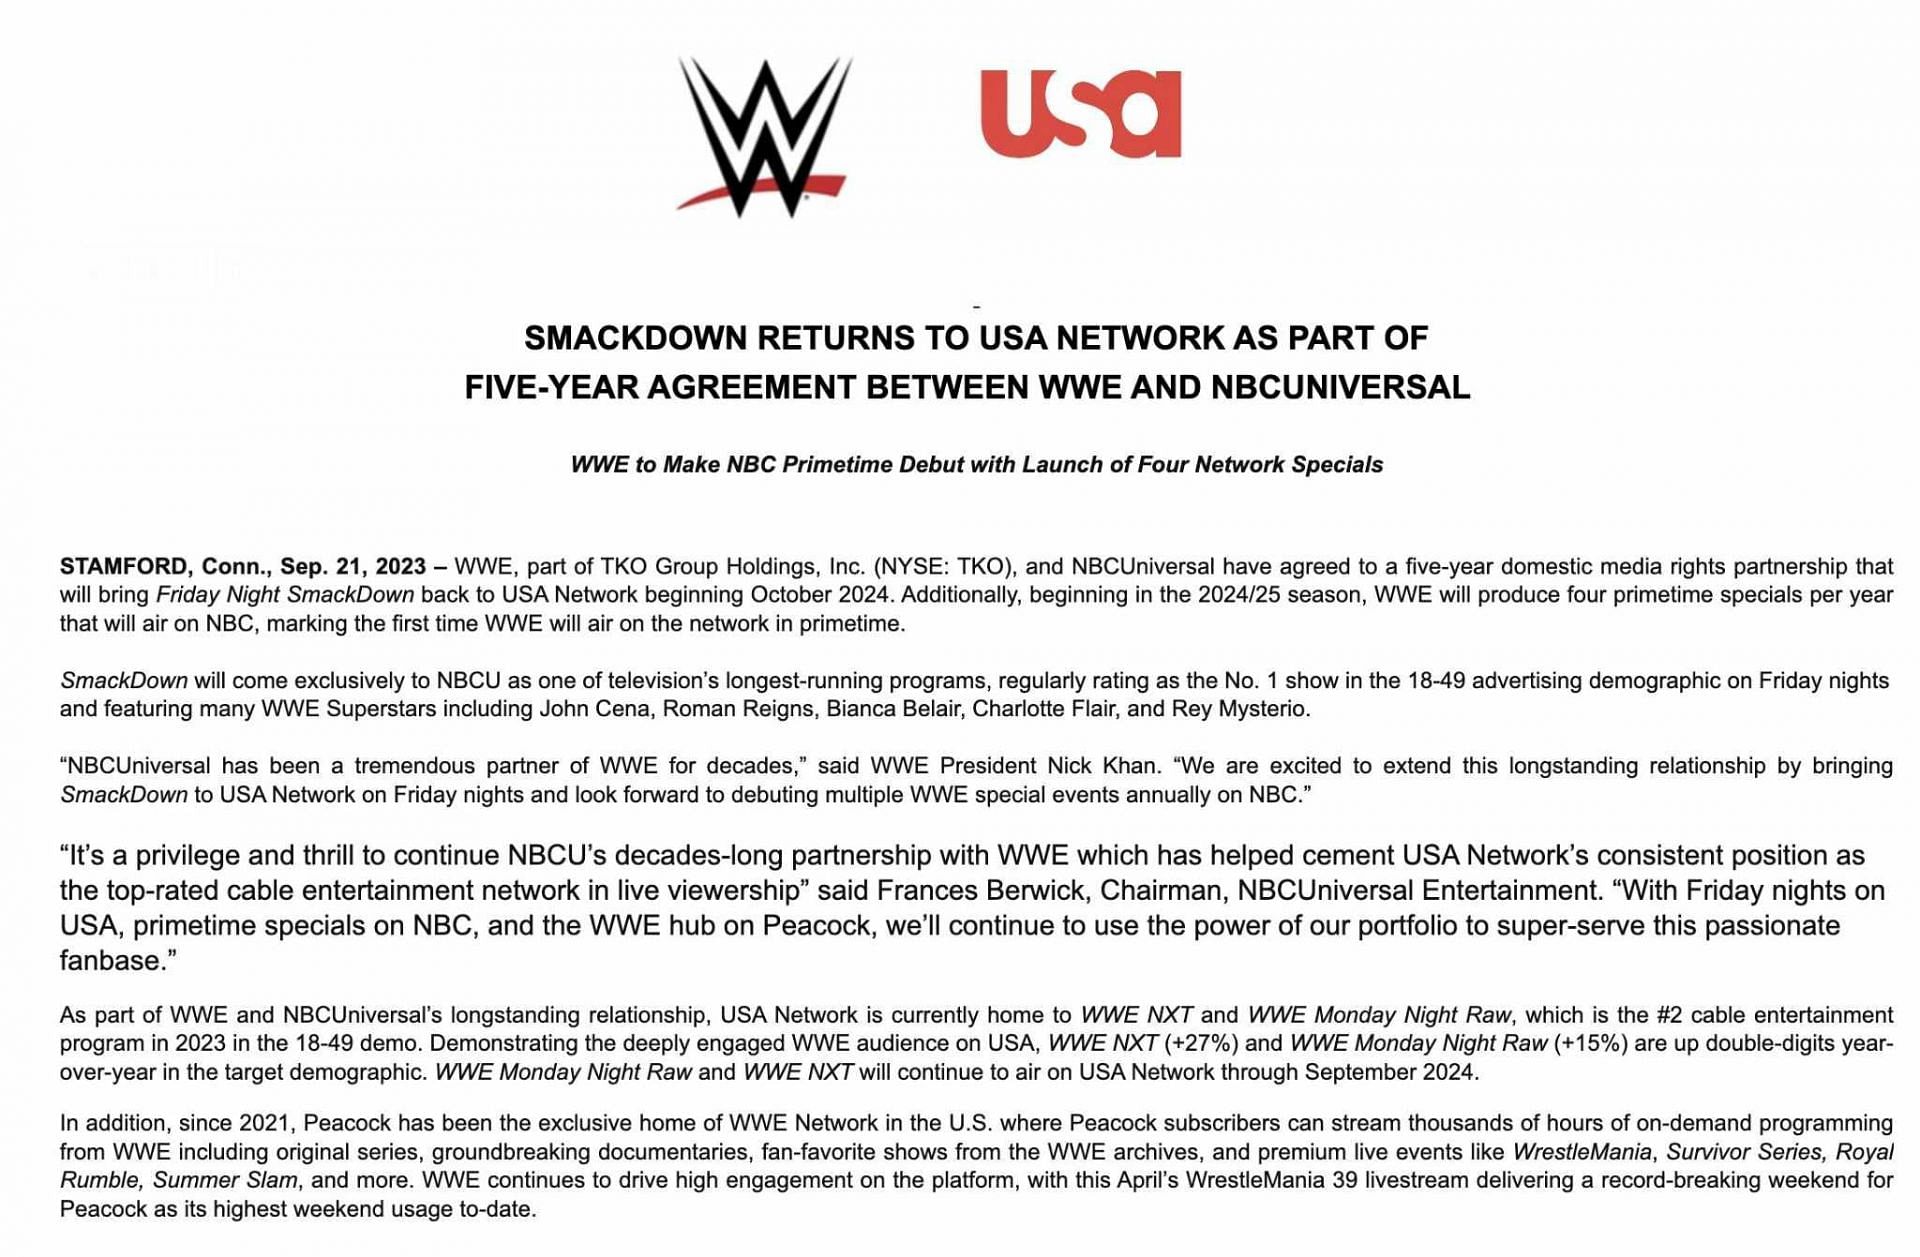 WWE SmackDown will move to USA Network from Fox